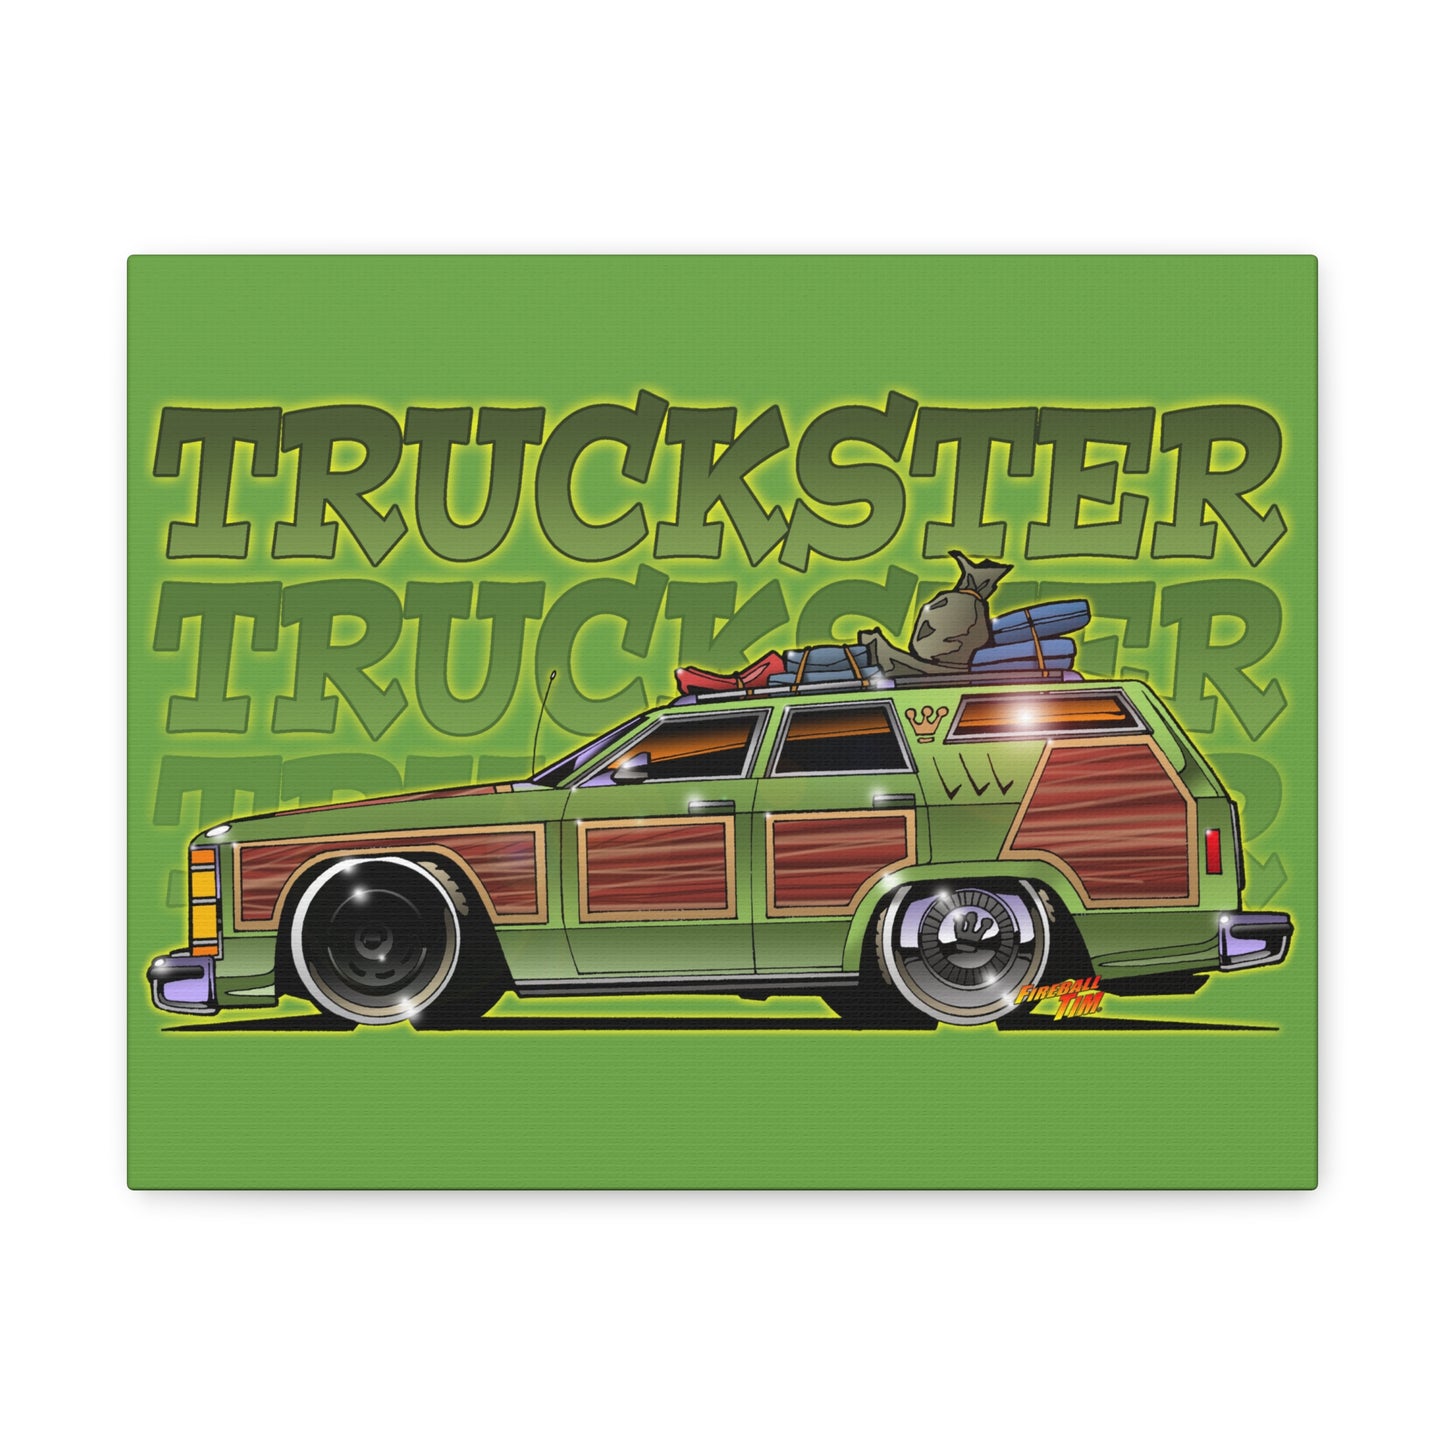 NATIONAL LAMPOON'S VACATION FAMILY TRUCKSTER Movie Car Canvas Gallery Art Print 11x14